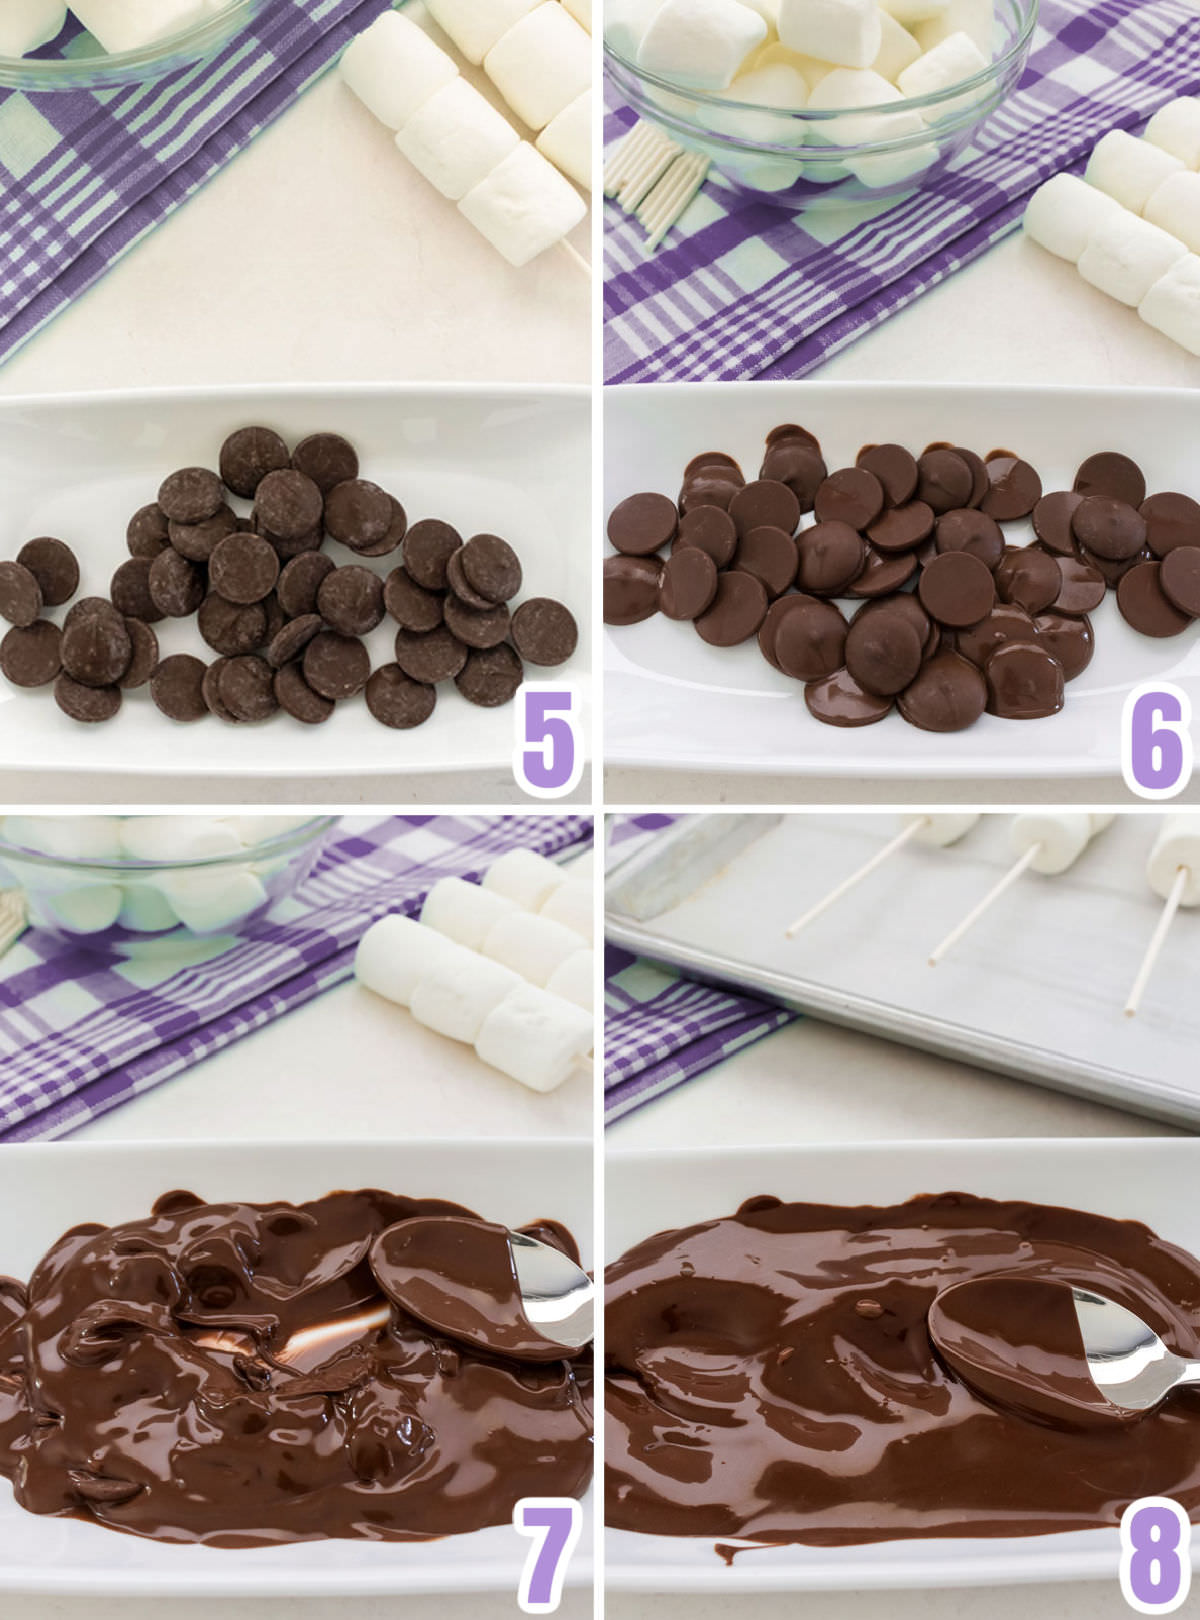 Collage image showing the steps necessary to melt the chocolate for the marshmallow pops.